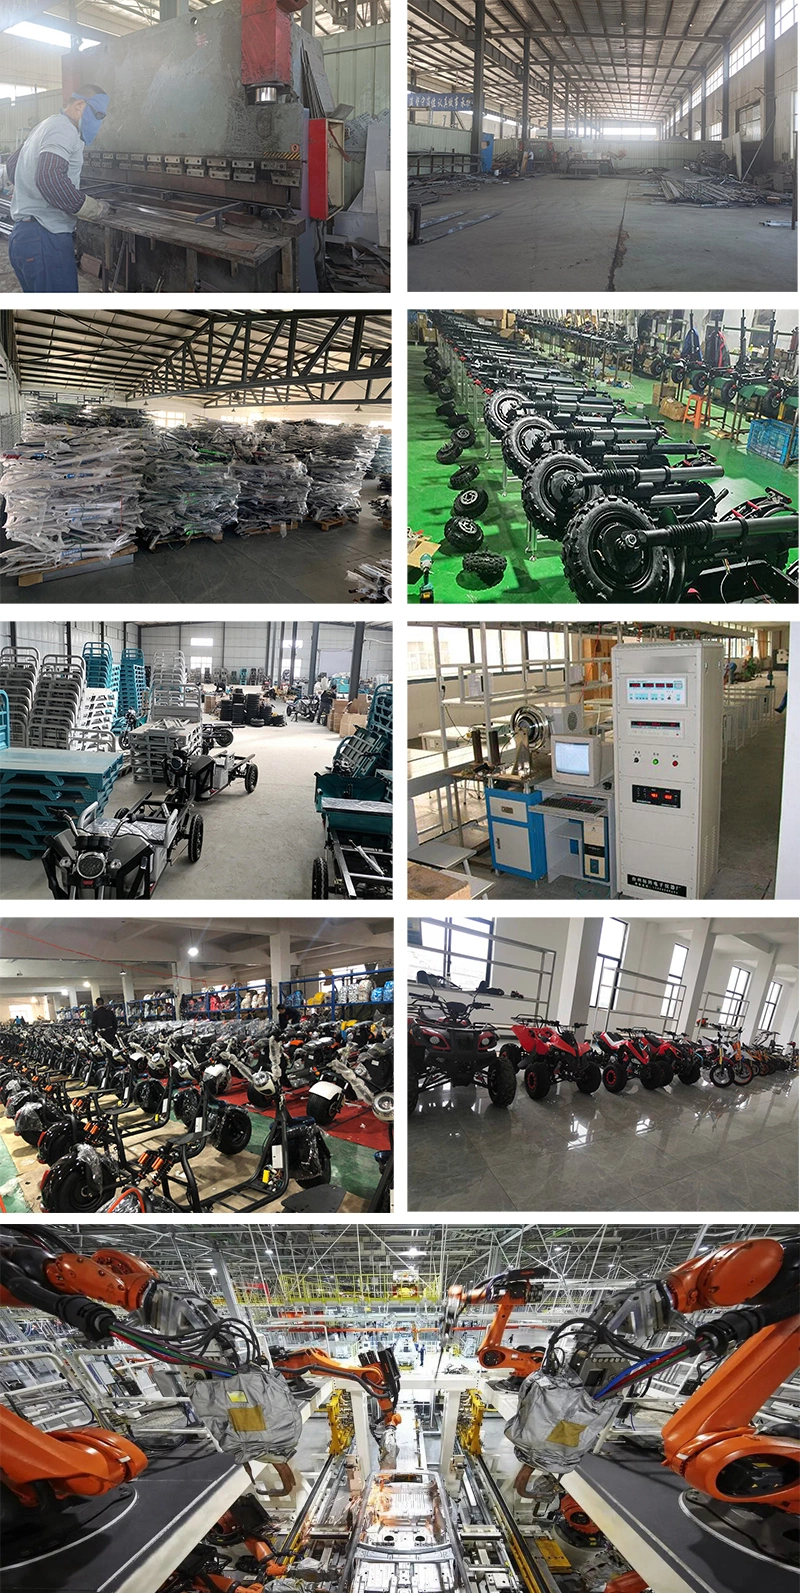 Scooter Motorcycle Kit 8000W Motor Conversion 3000W 3 Wheel 2000W 1000W Motorcycles Kits Adult for China E Electric Bicycle